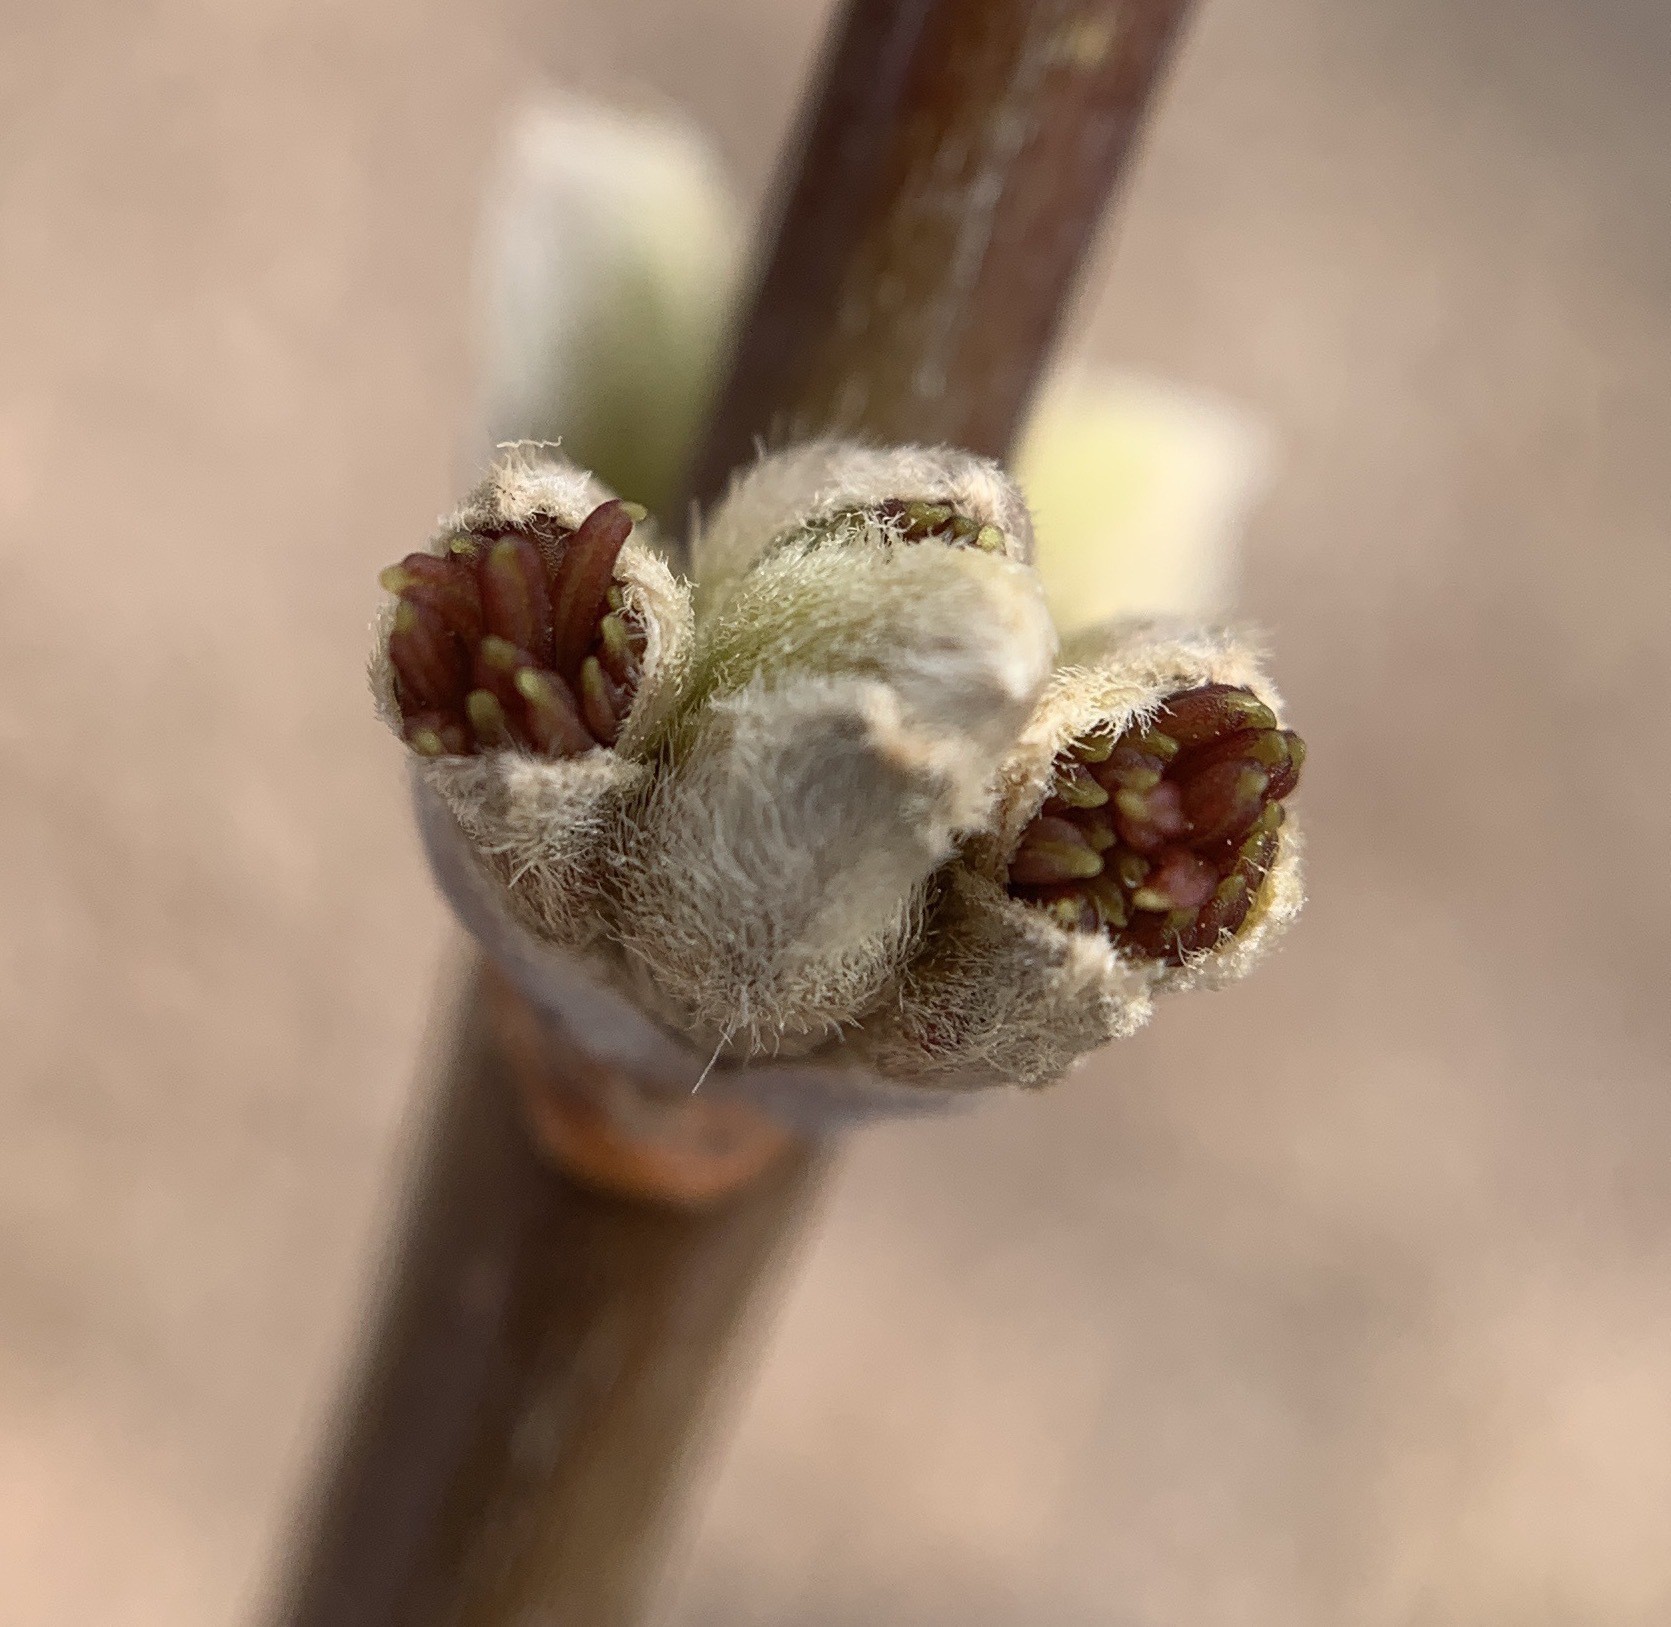 boxelder flower with stamens just protruding from the bud.